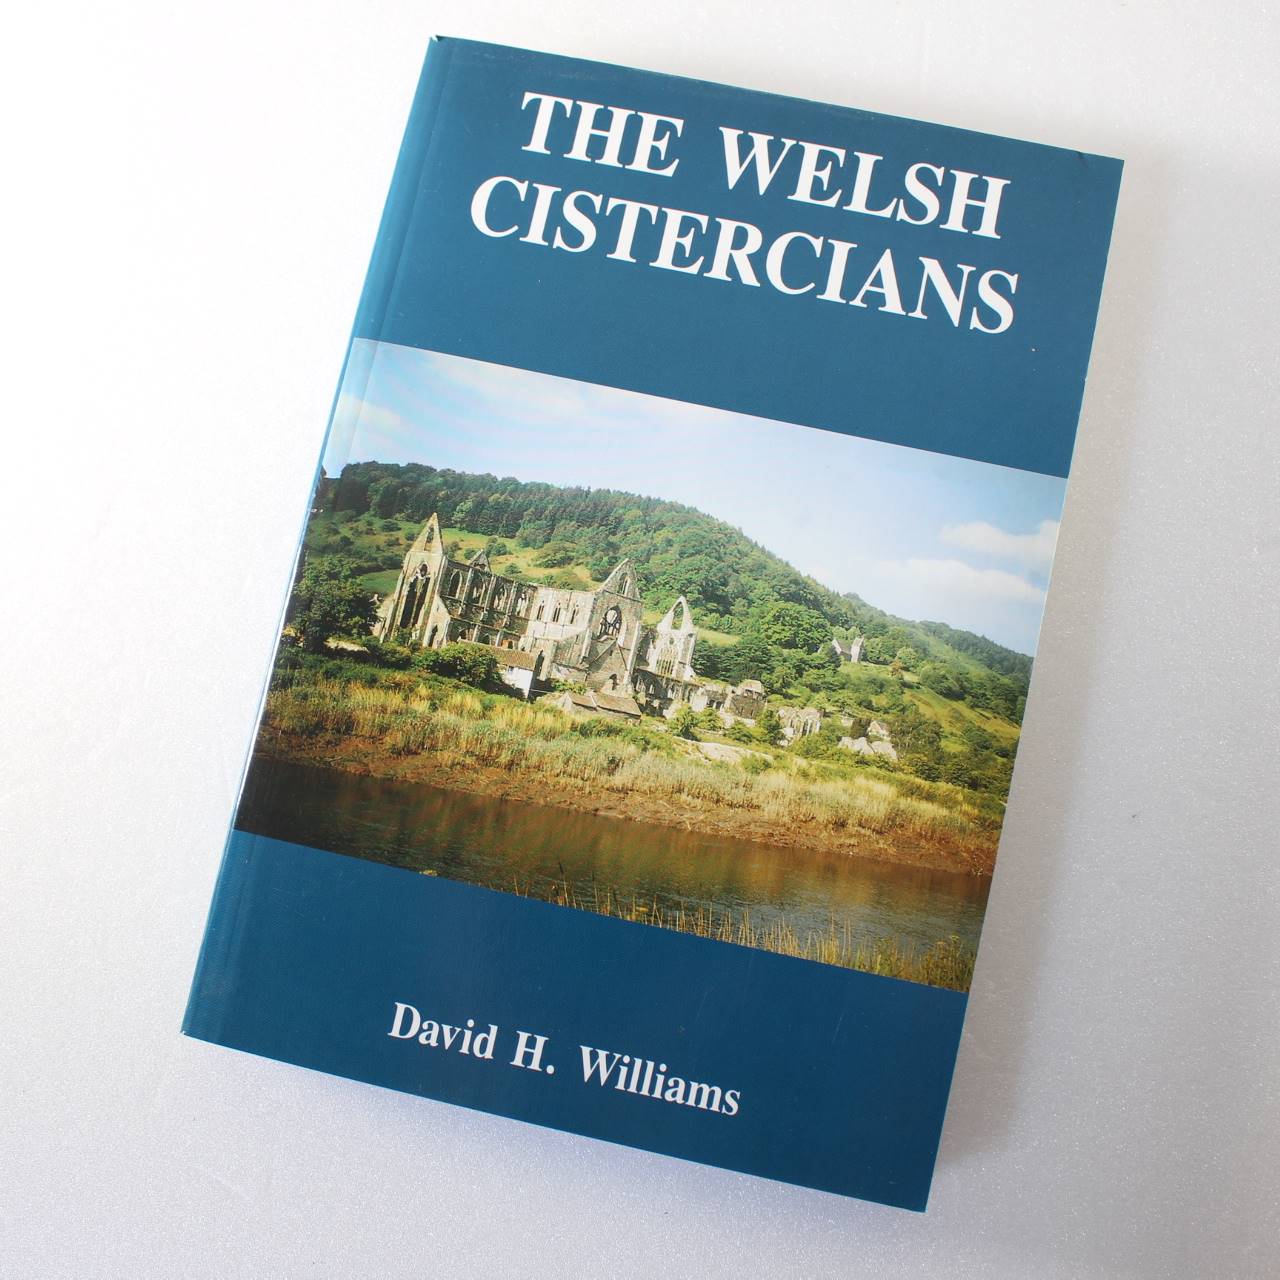 Welsh Cistercians by David H. Williams - David H. Williams